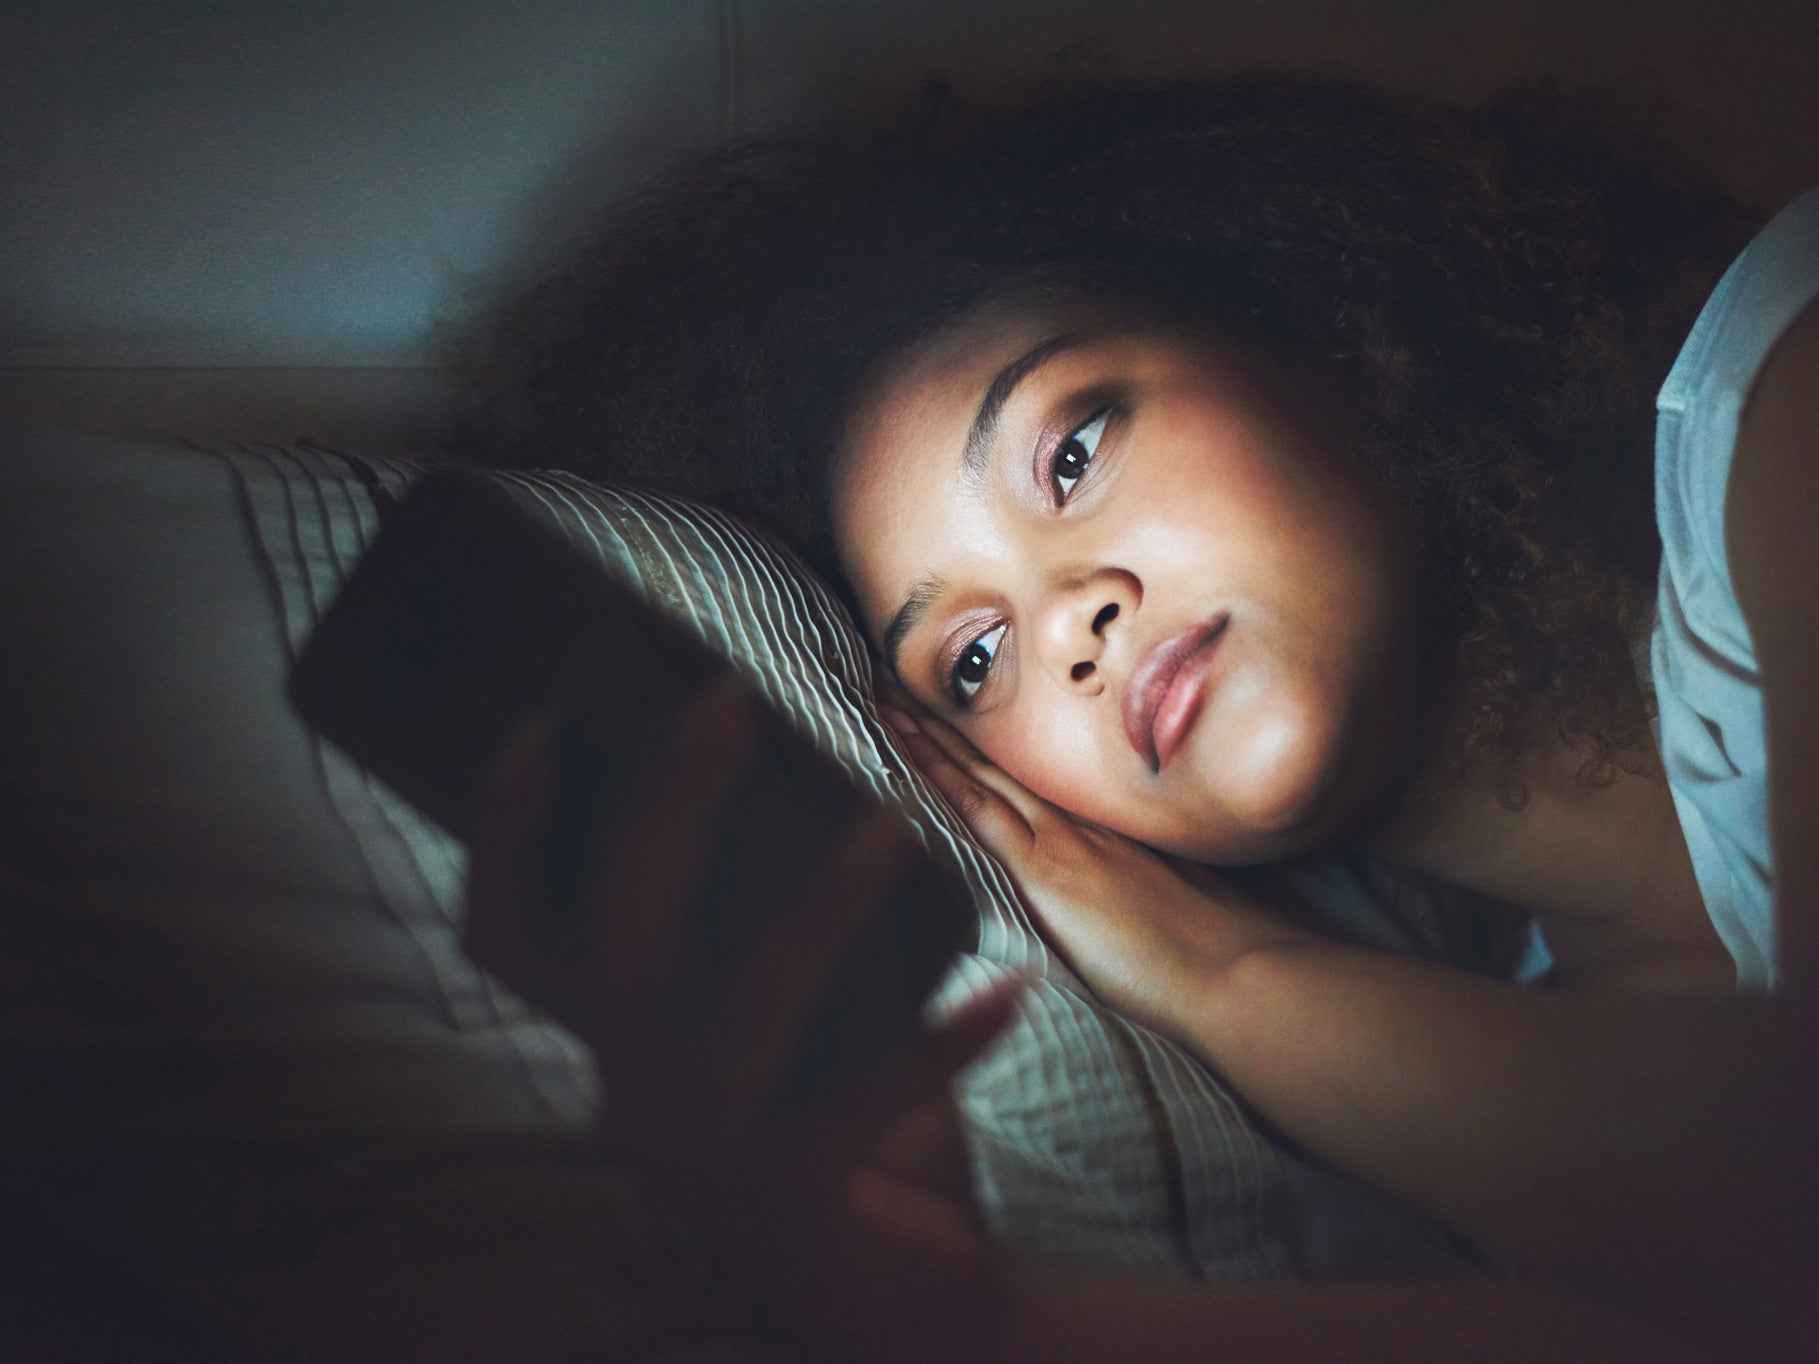 Limiting screen use is not the answer to browsing healthily in bed